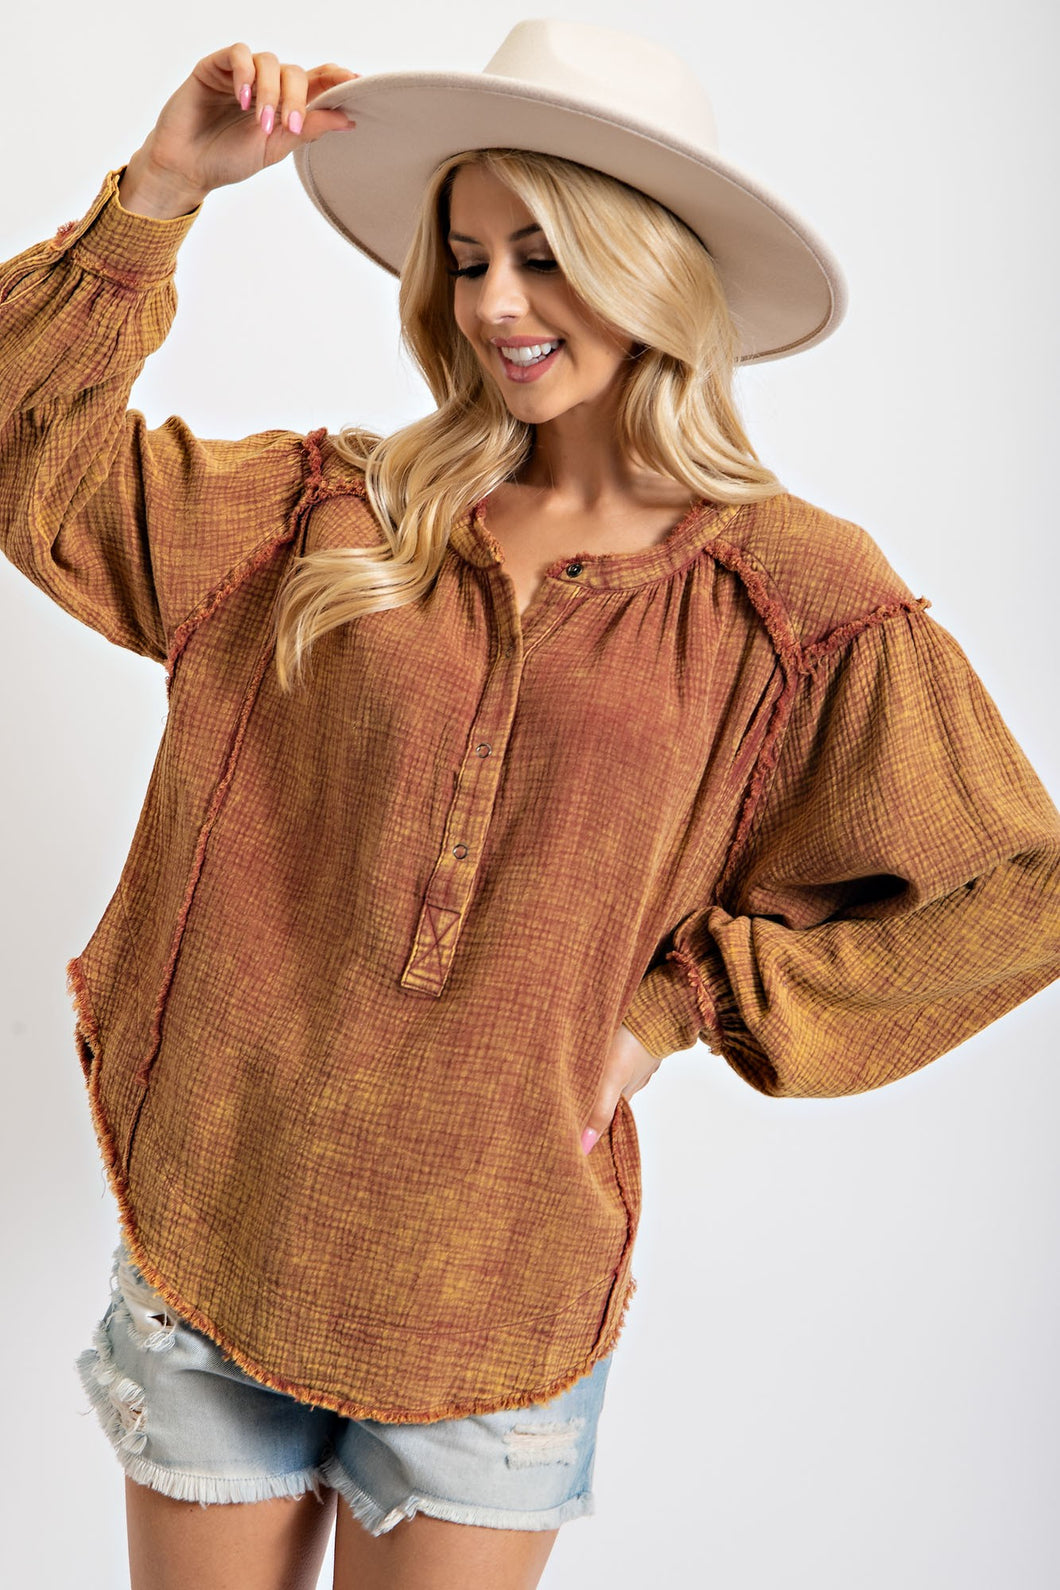 Easel Mineral Washed Cotton Gauze Tunic Top in Cinnamon ON ORDER ESTIMATED ARRIVAL OCTOBER Shirts & Tops Easel   